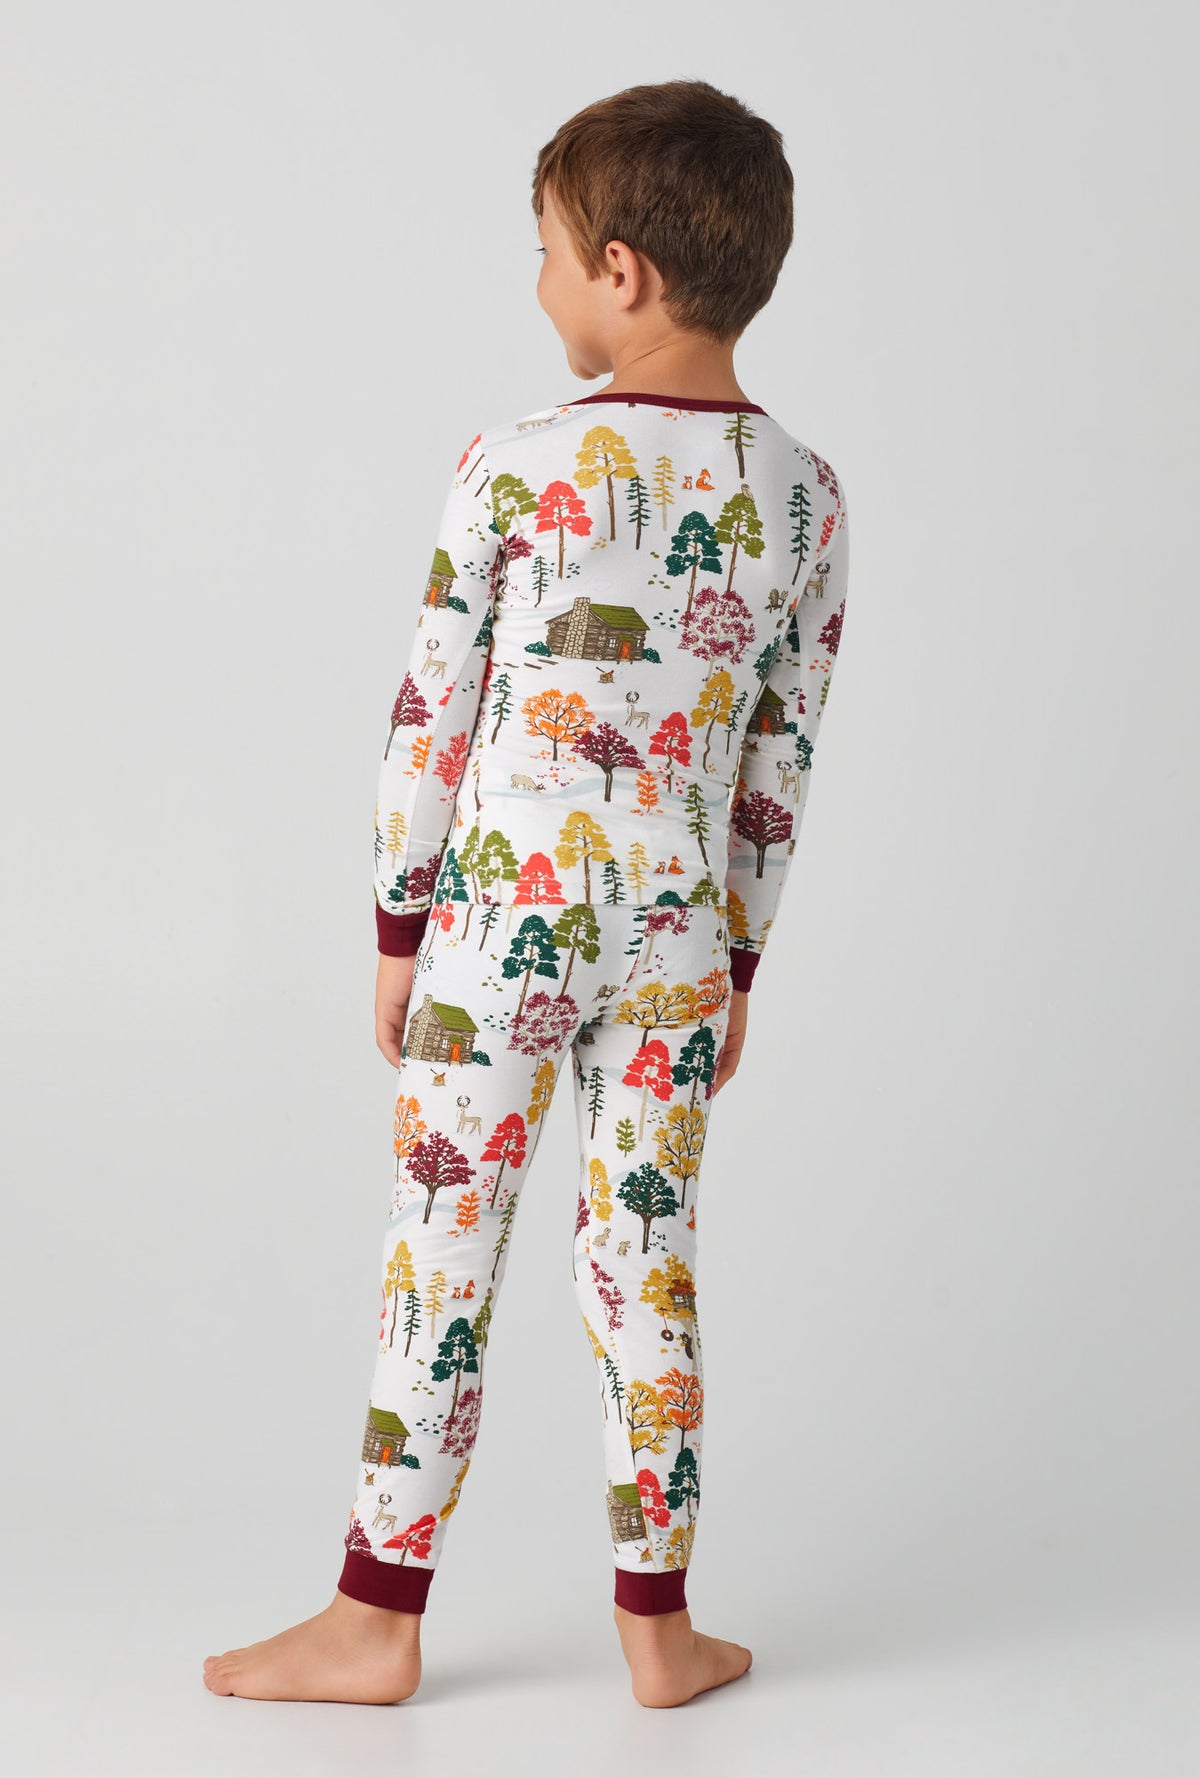 A boy wearing Long Sleeve Stretch Jersey PJ Set with forest retreat print